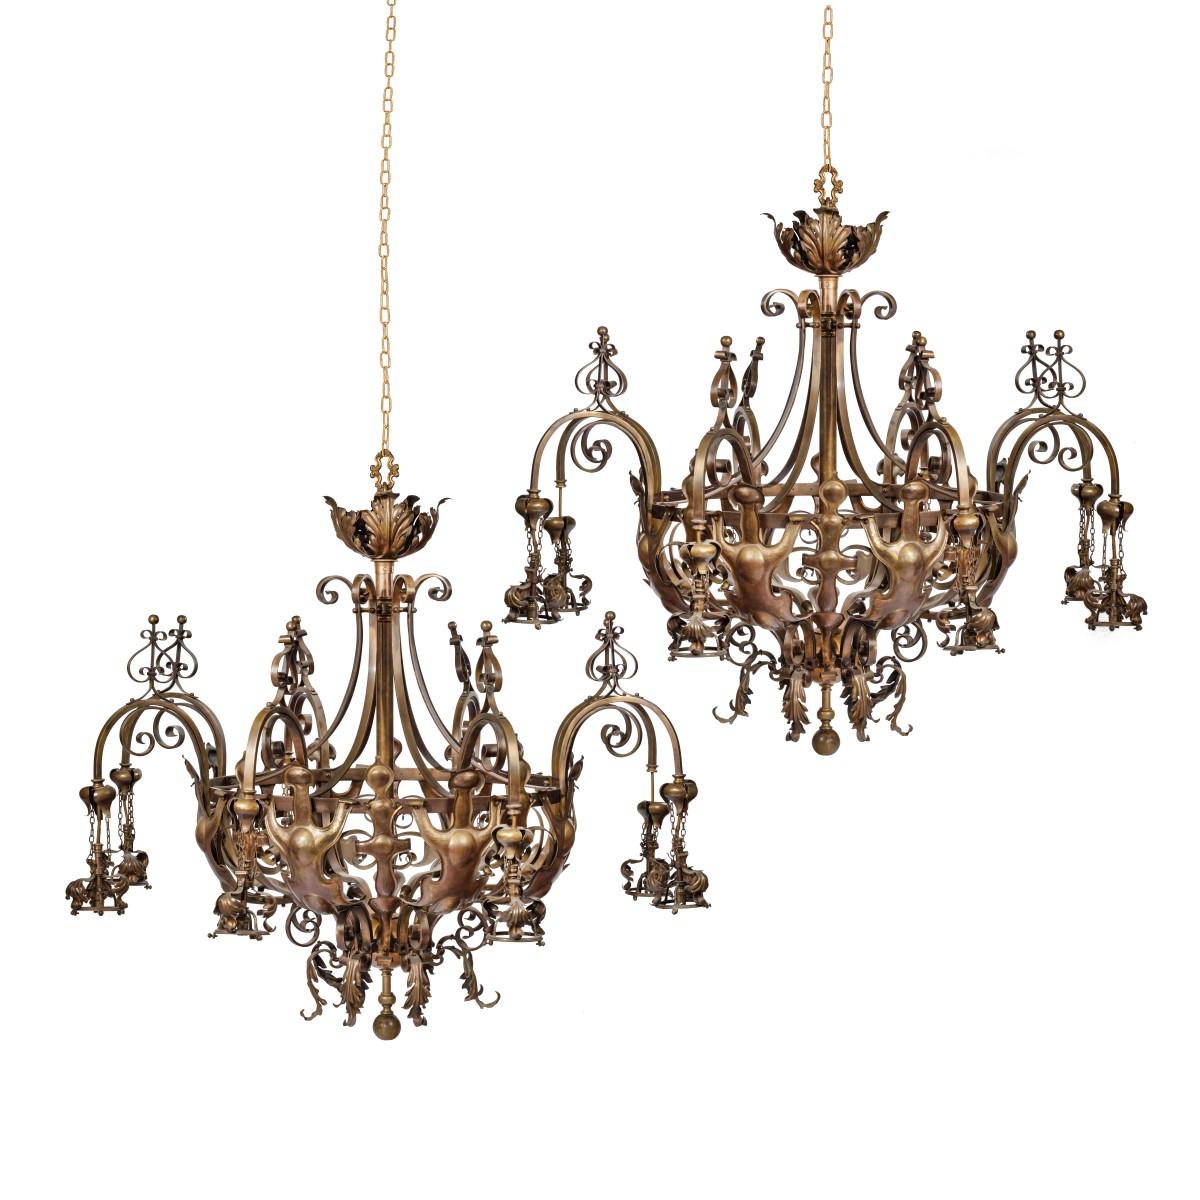 Pair of Large Victorian 8-Light Brass Chandeliers In Good Condition For Sale In Lymington, Hampshire